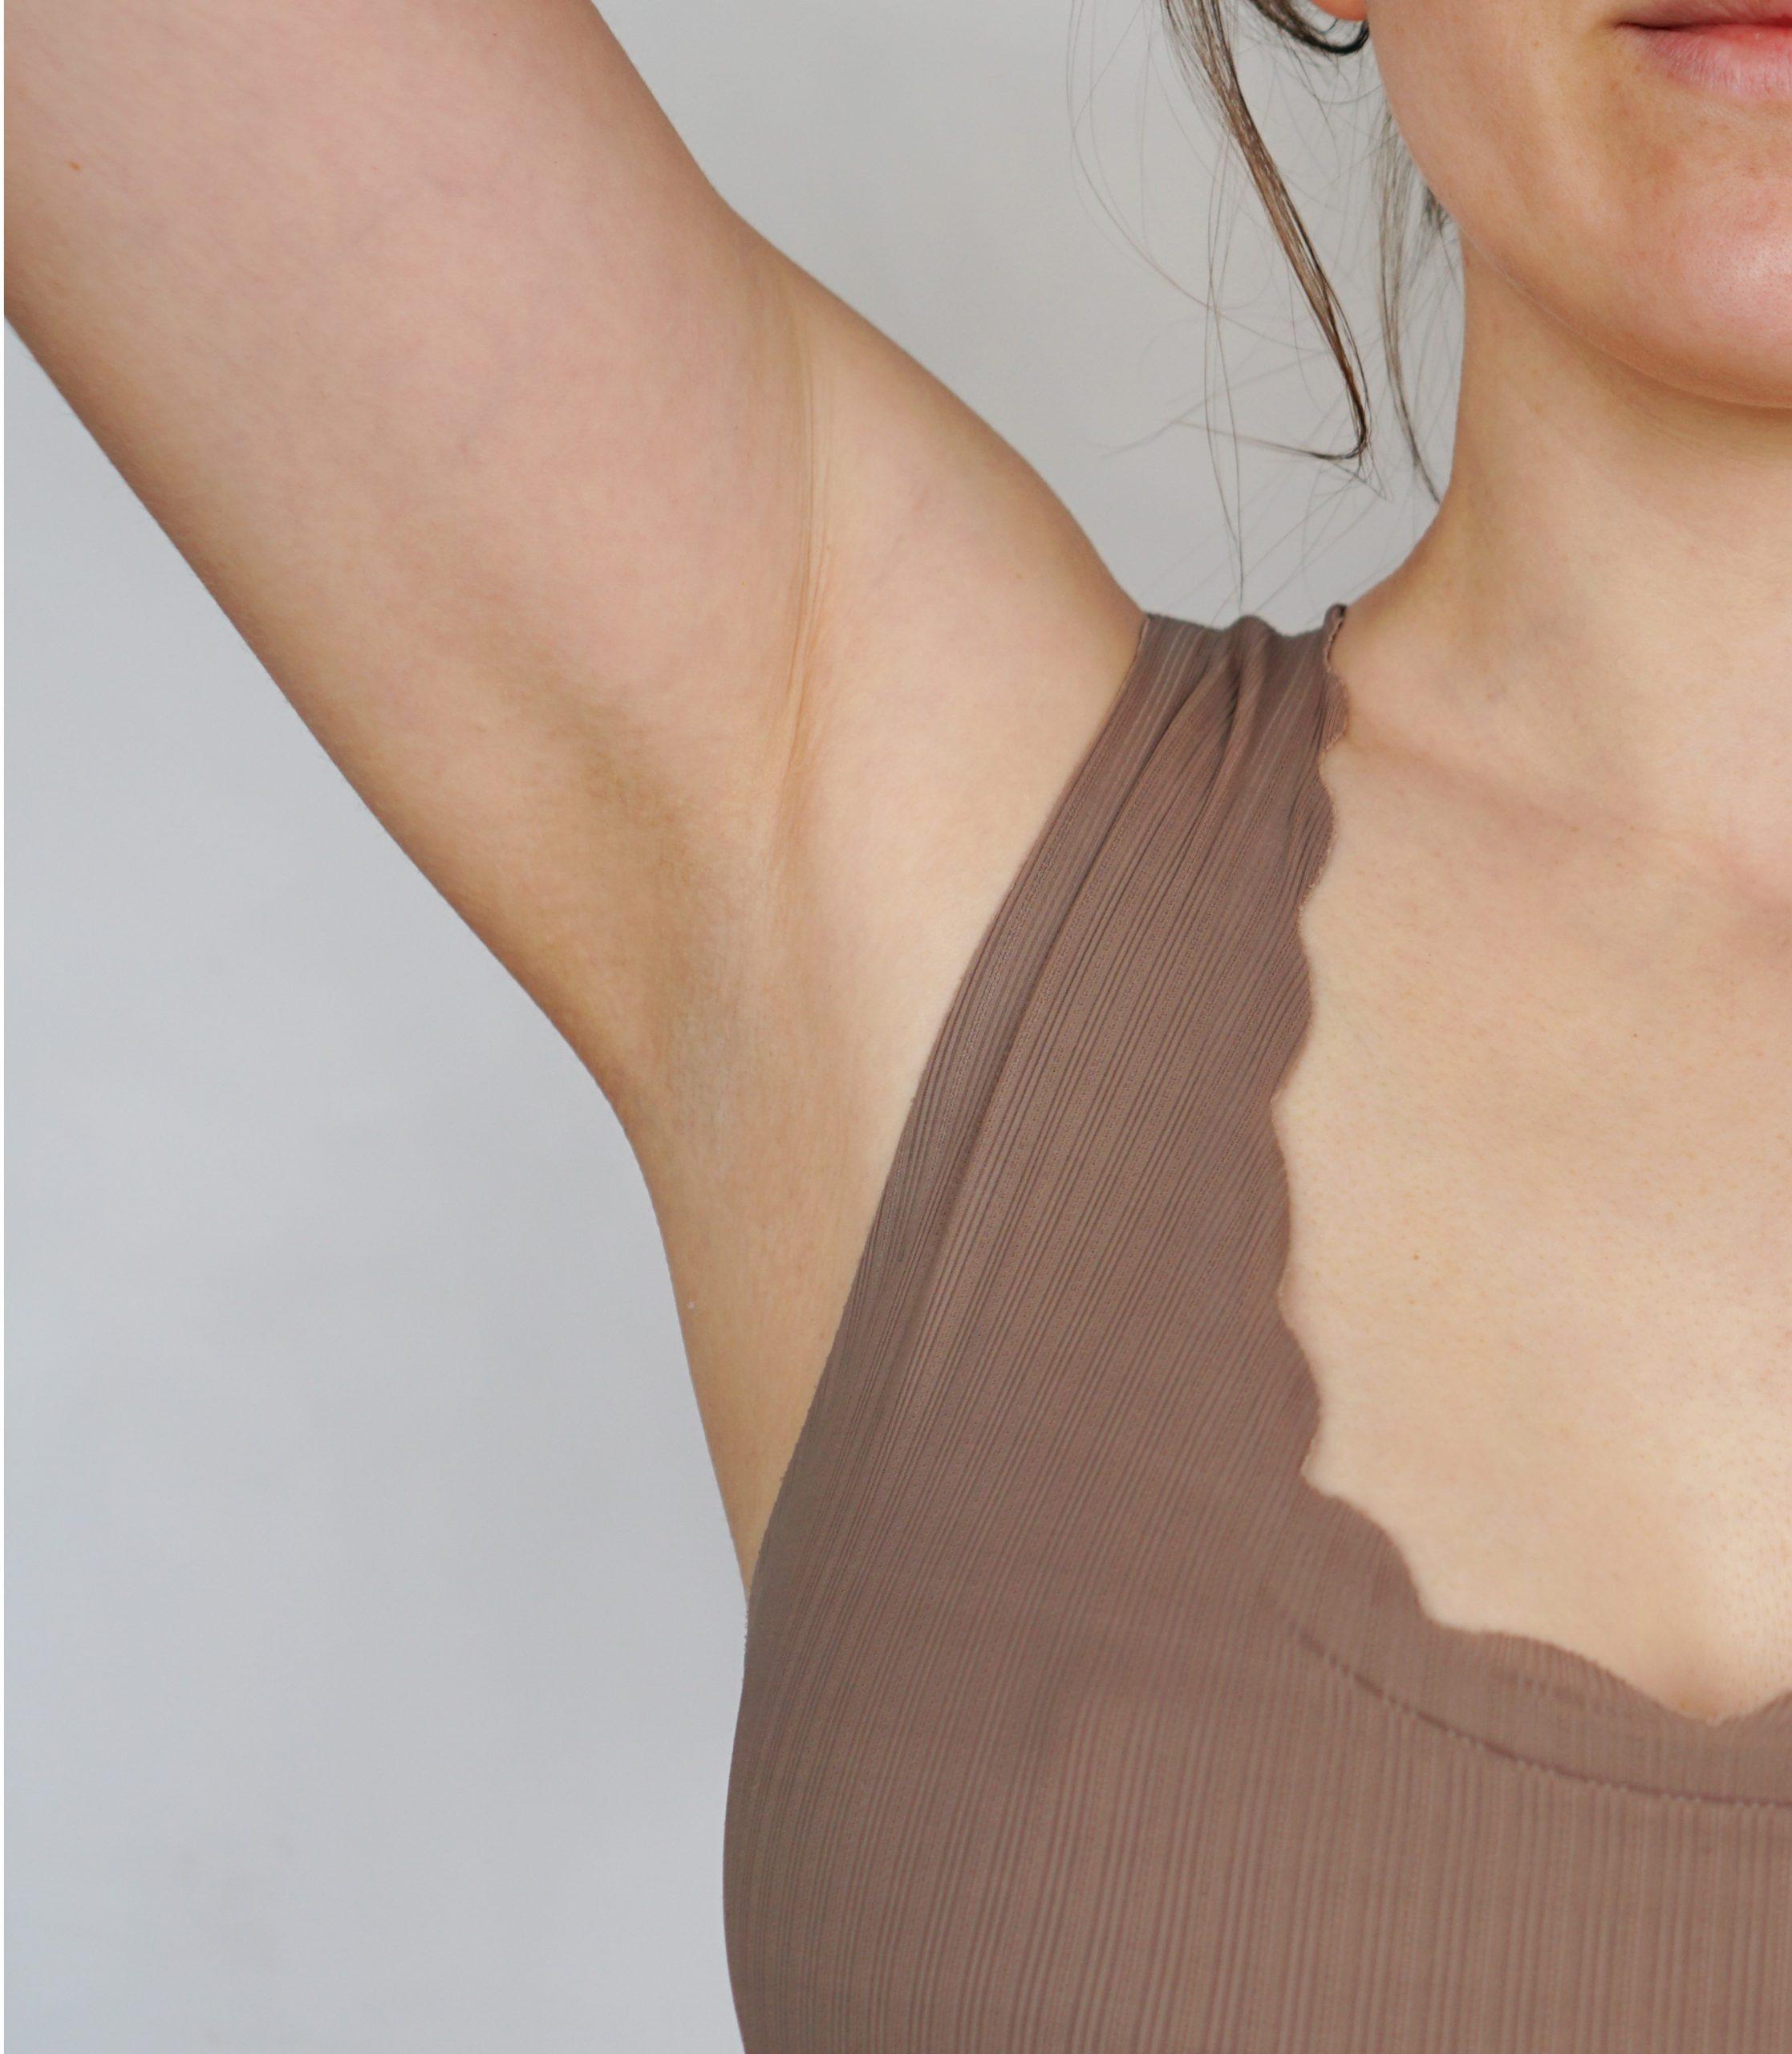 Armpit before laser hair removal treatment